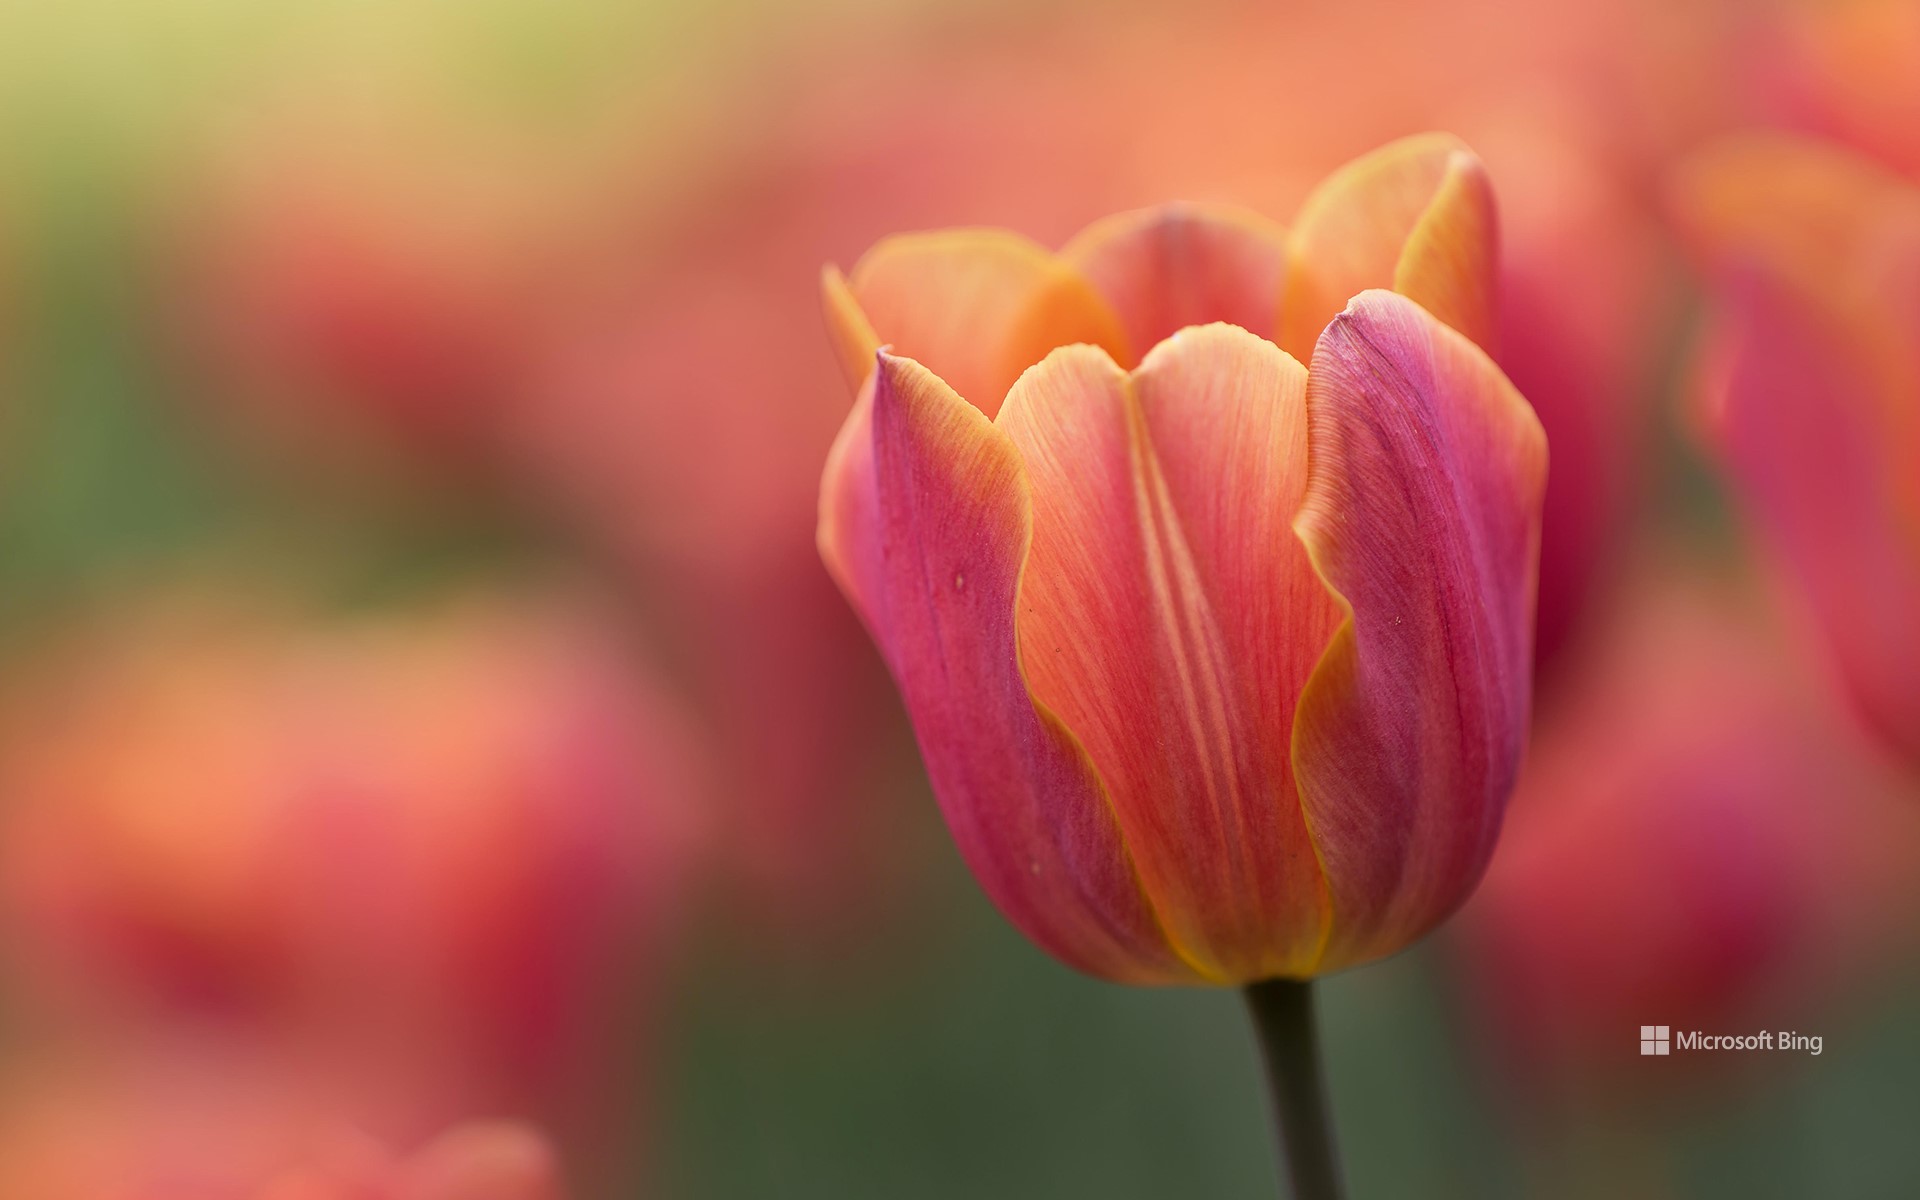 A close-up of a tulip from the Canadian Tulip Festival in Ottawa